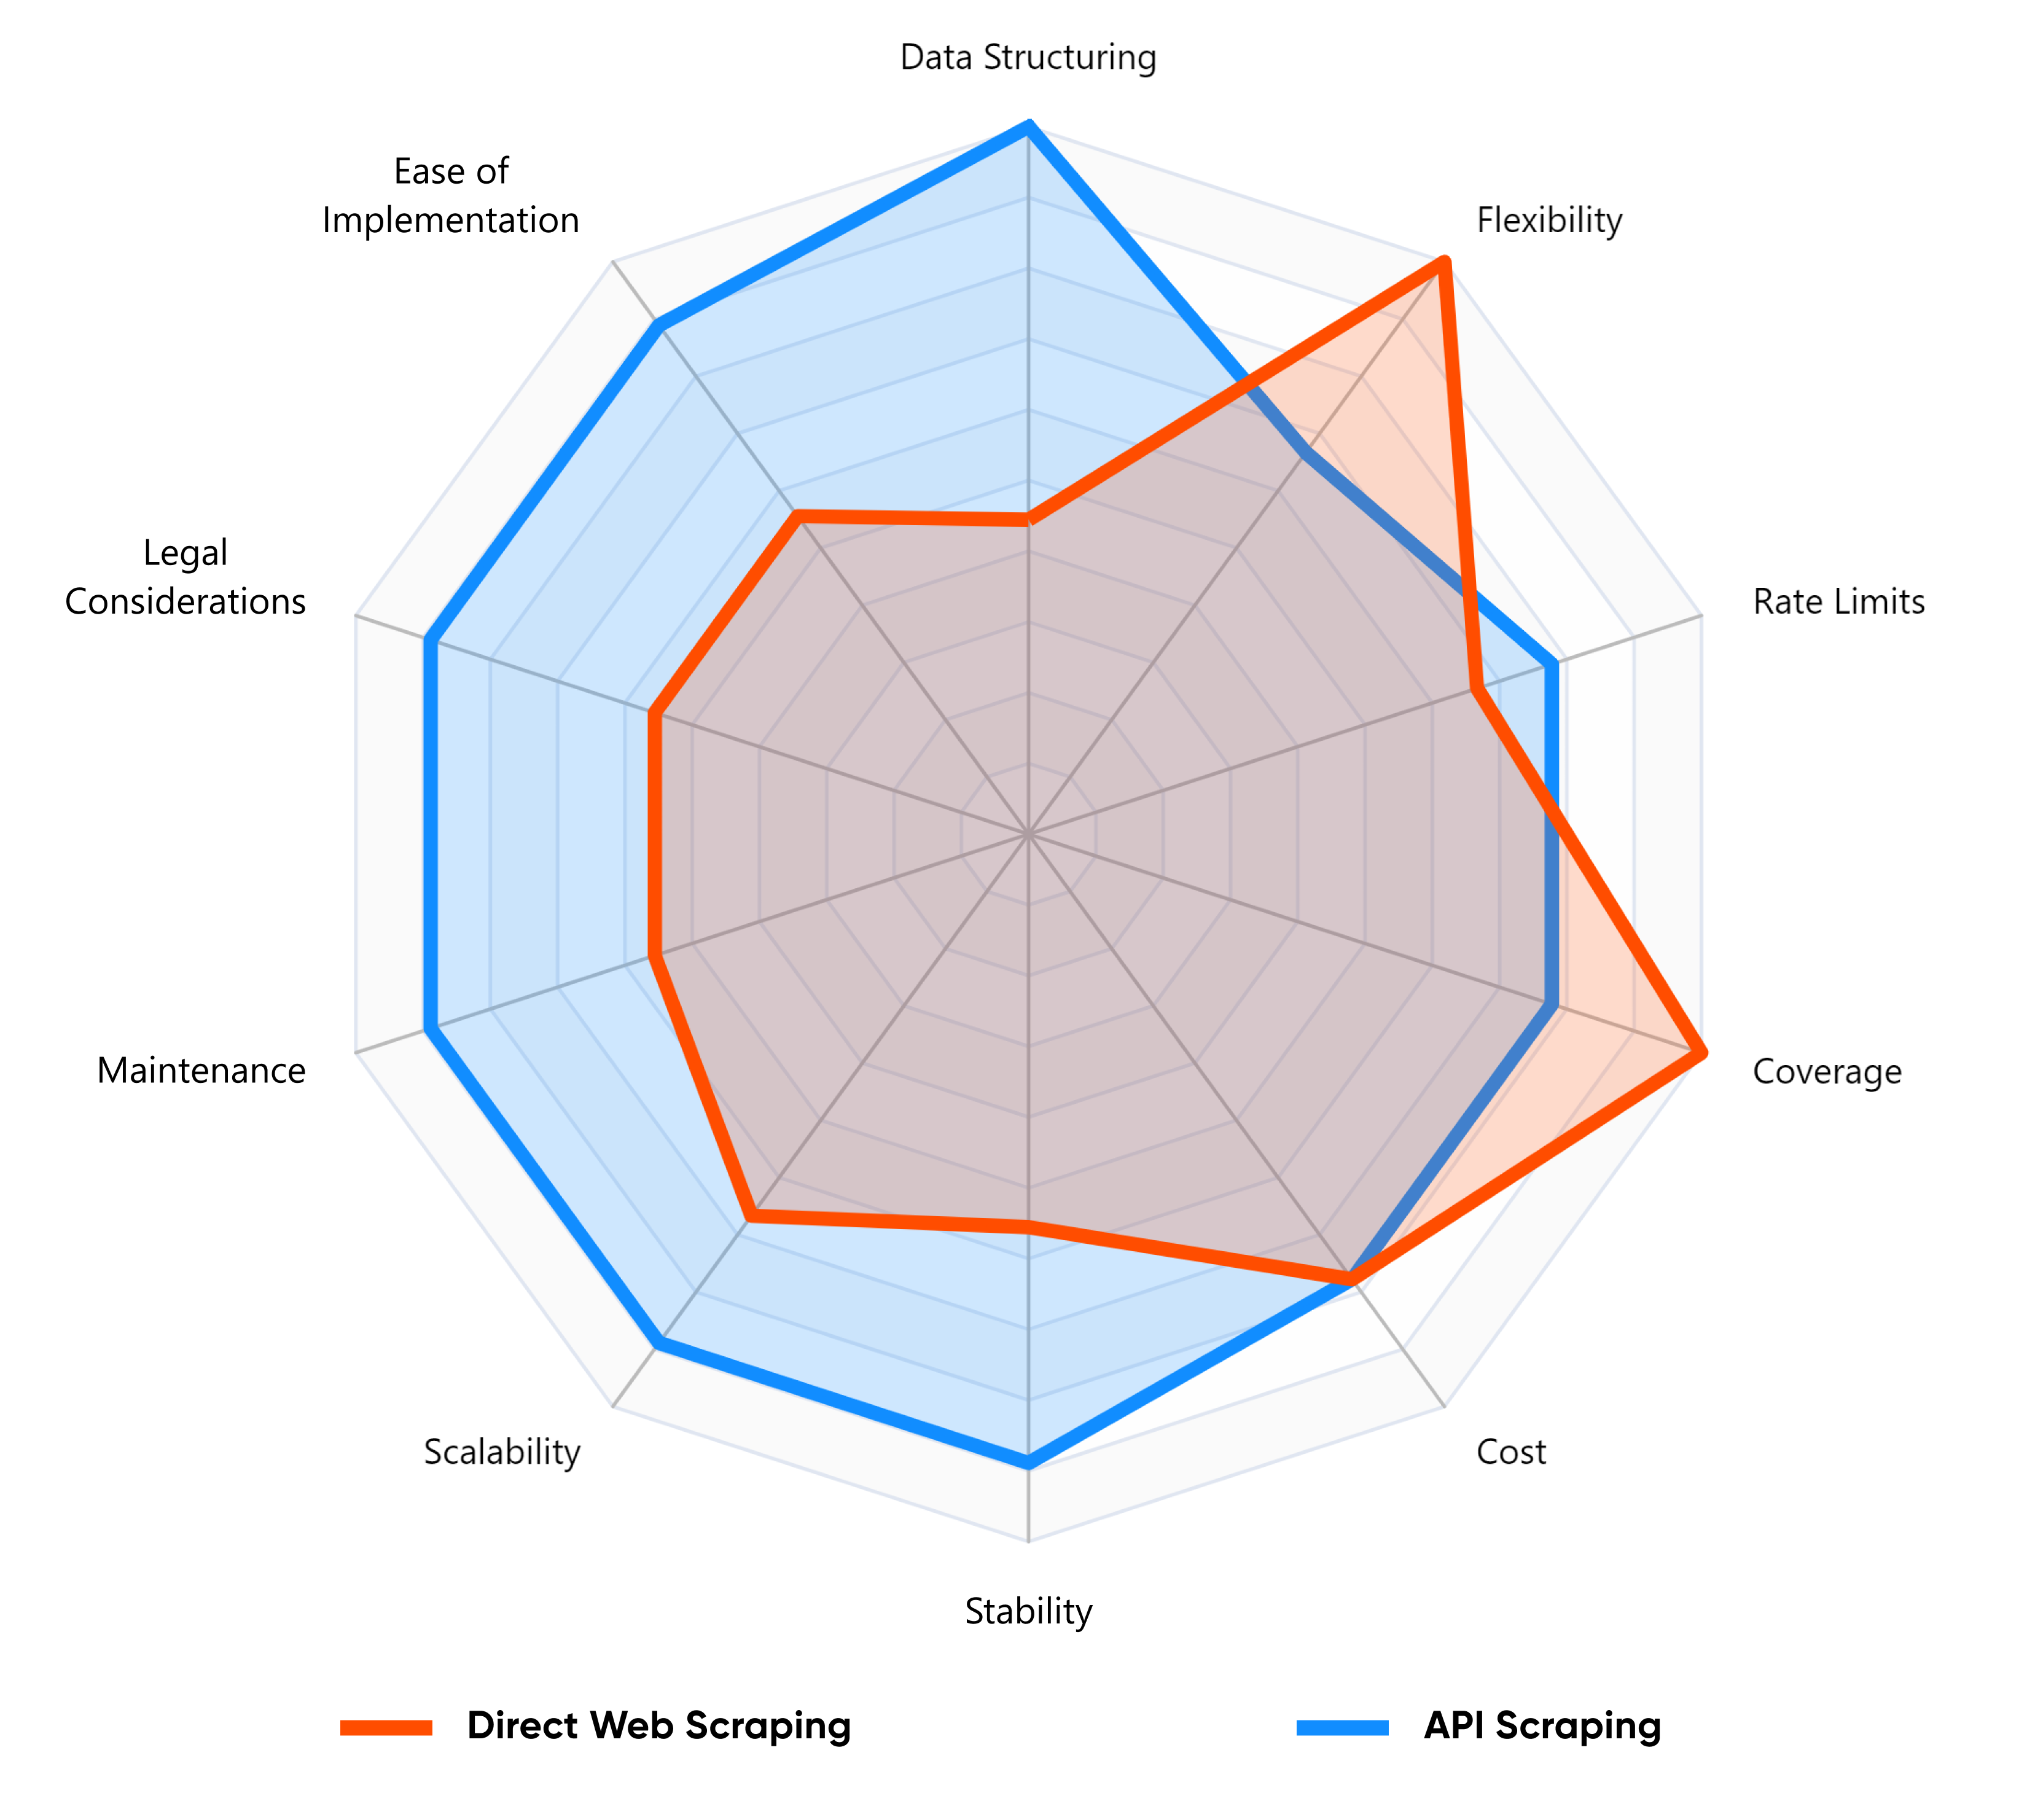 Radar chart comparing direct web scraping and API Scraping across various criteria like stability, flexibility, and scalability.